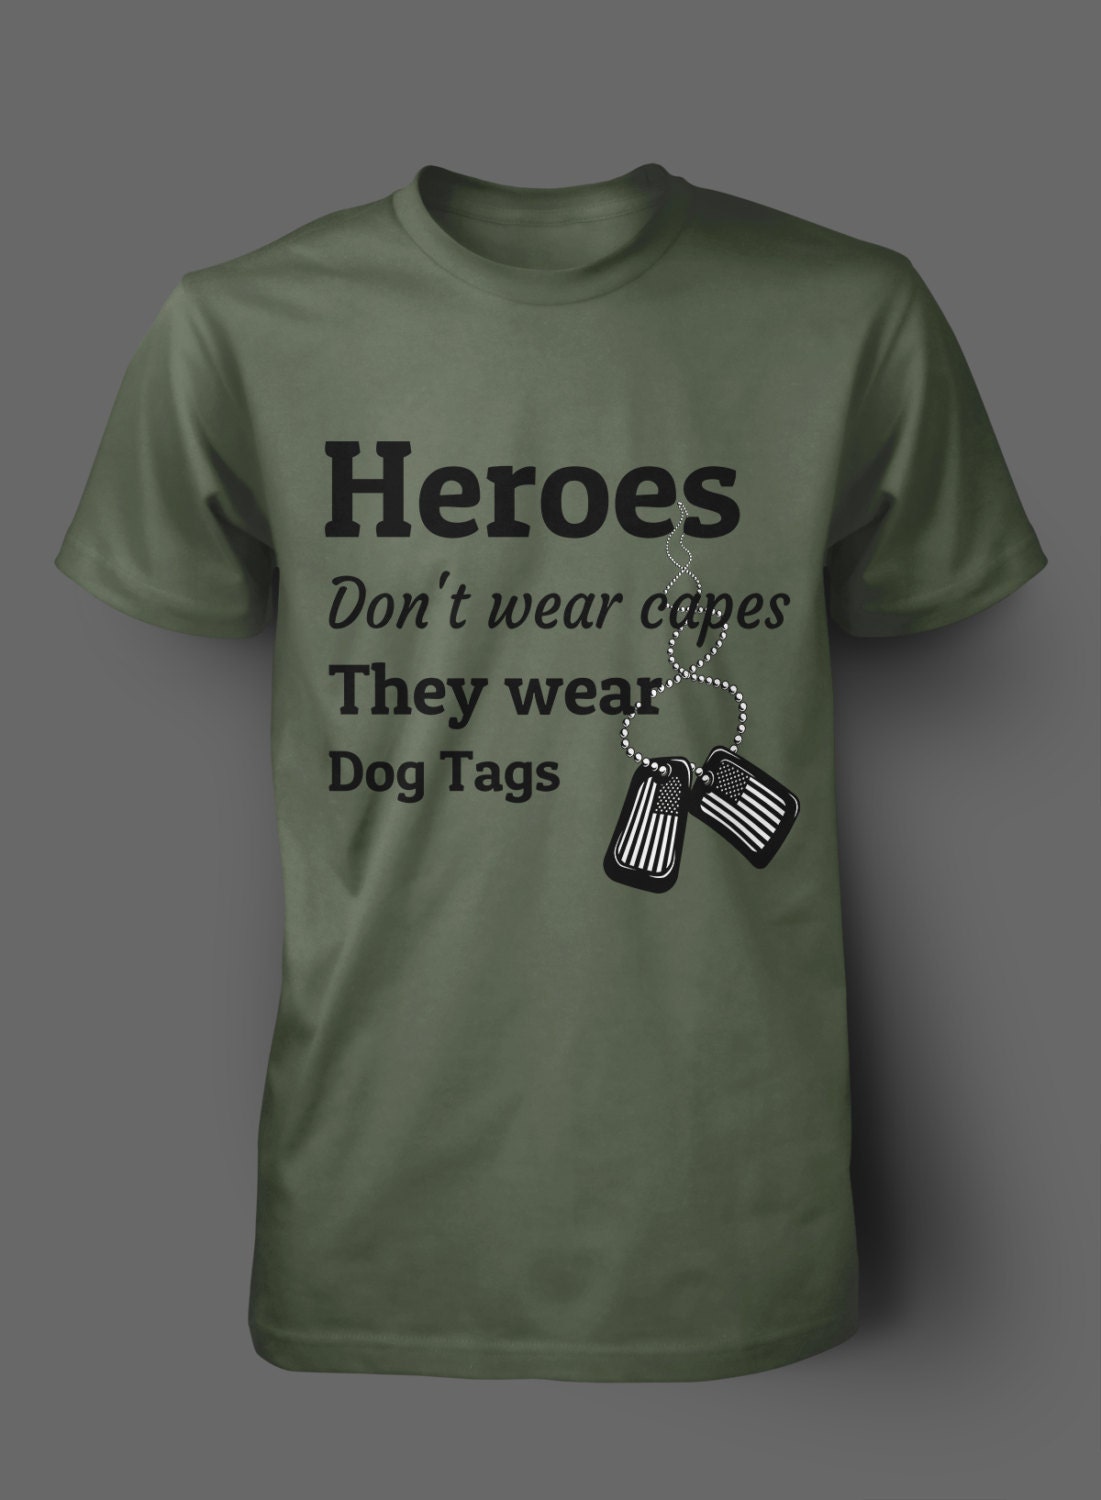 Heroes don't wear capes they wear dog tags by WilliamsDigitalStore